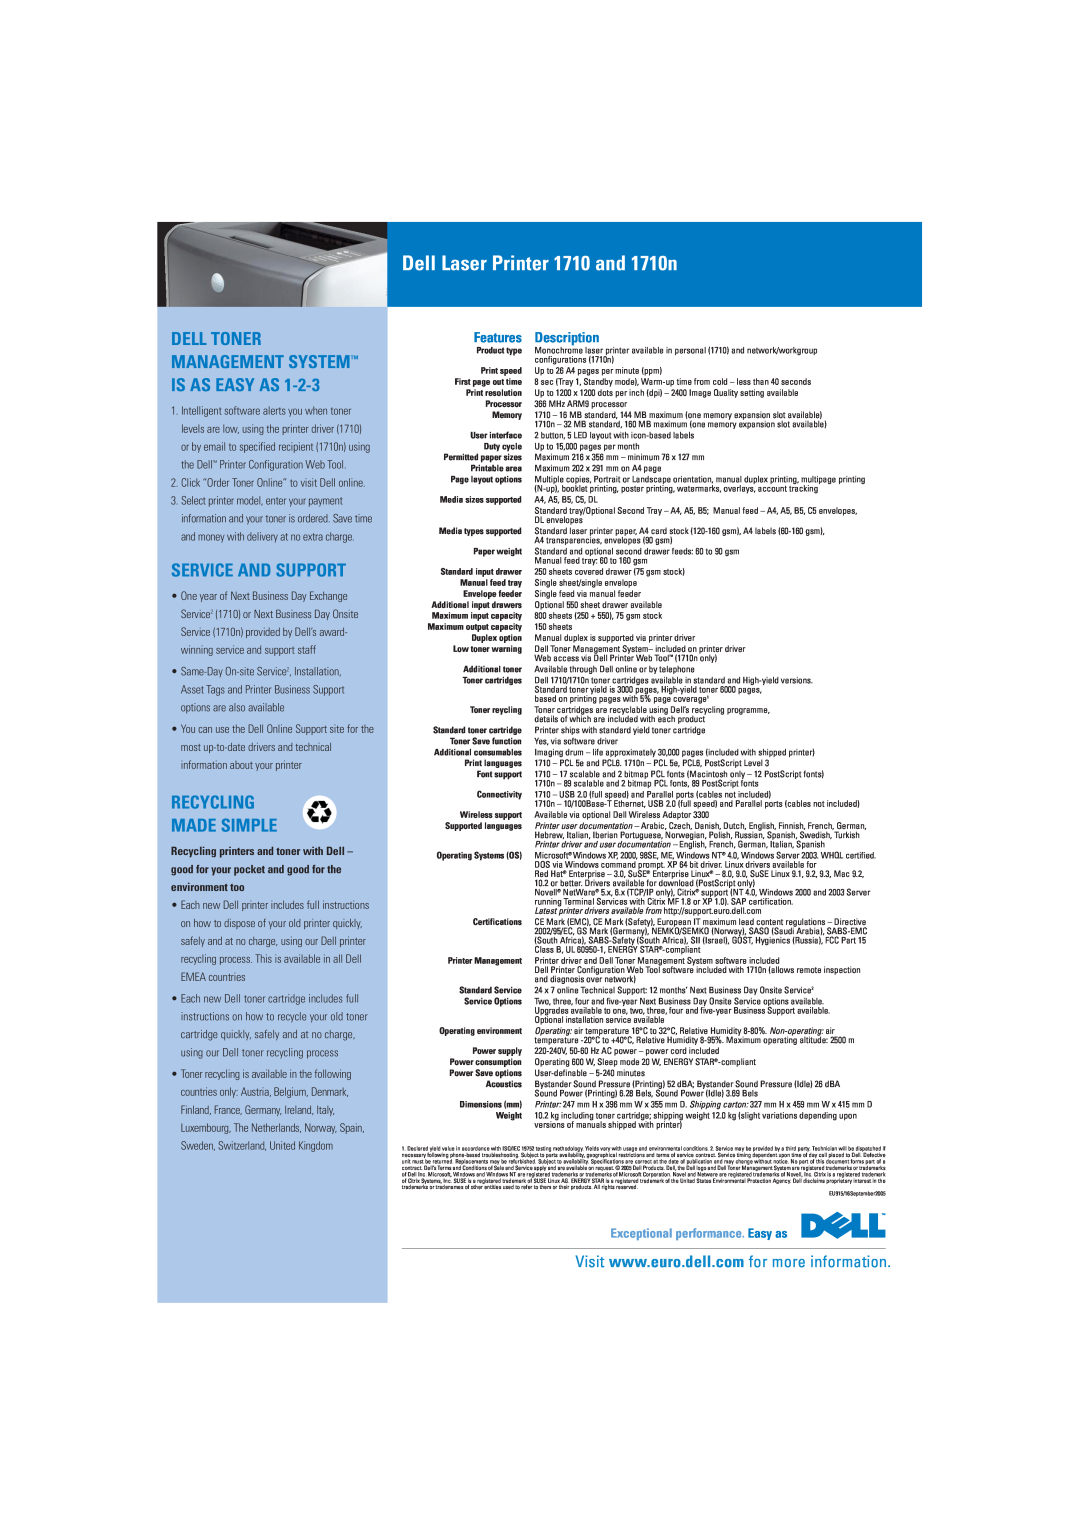 Dell warranty Dell Laser Printer 1710 and 1710n, Service And Support, Recycling Made Simple, Features, Description 